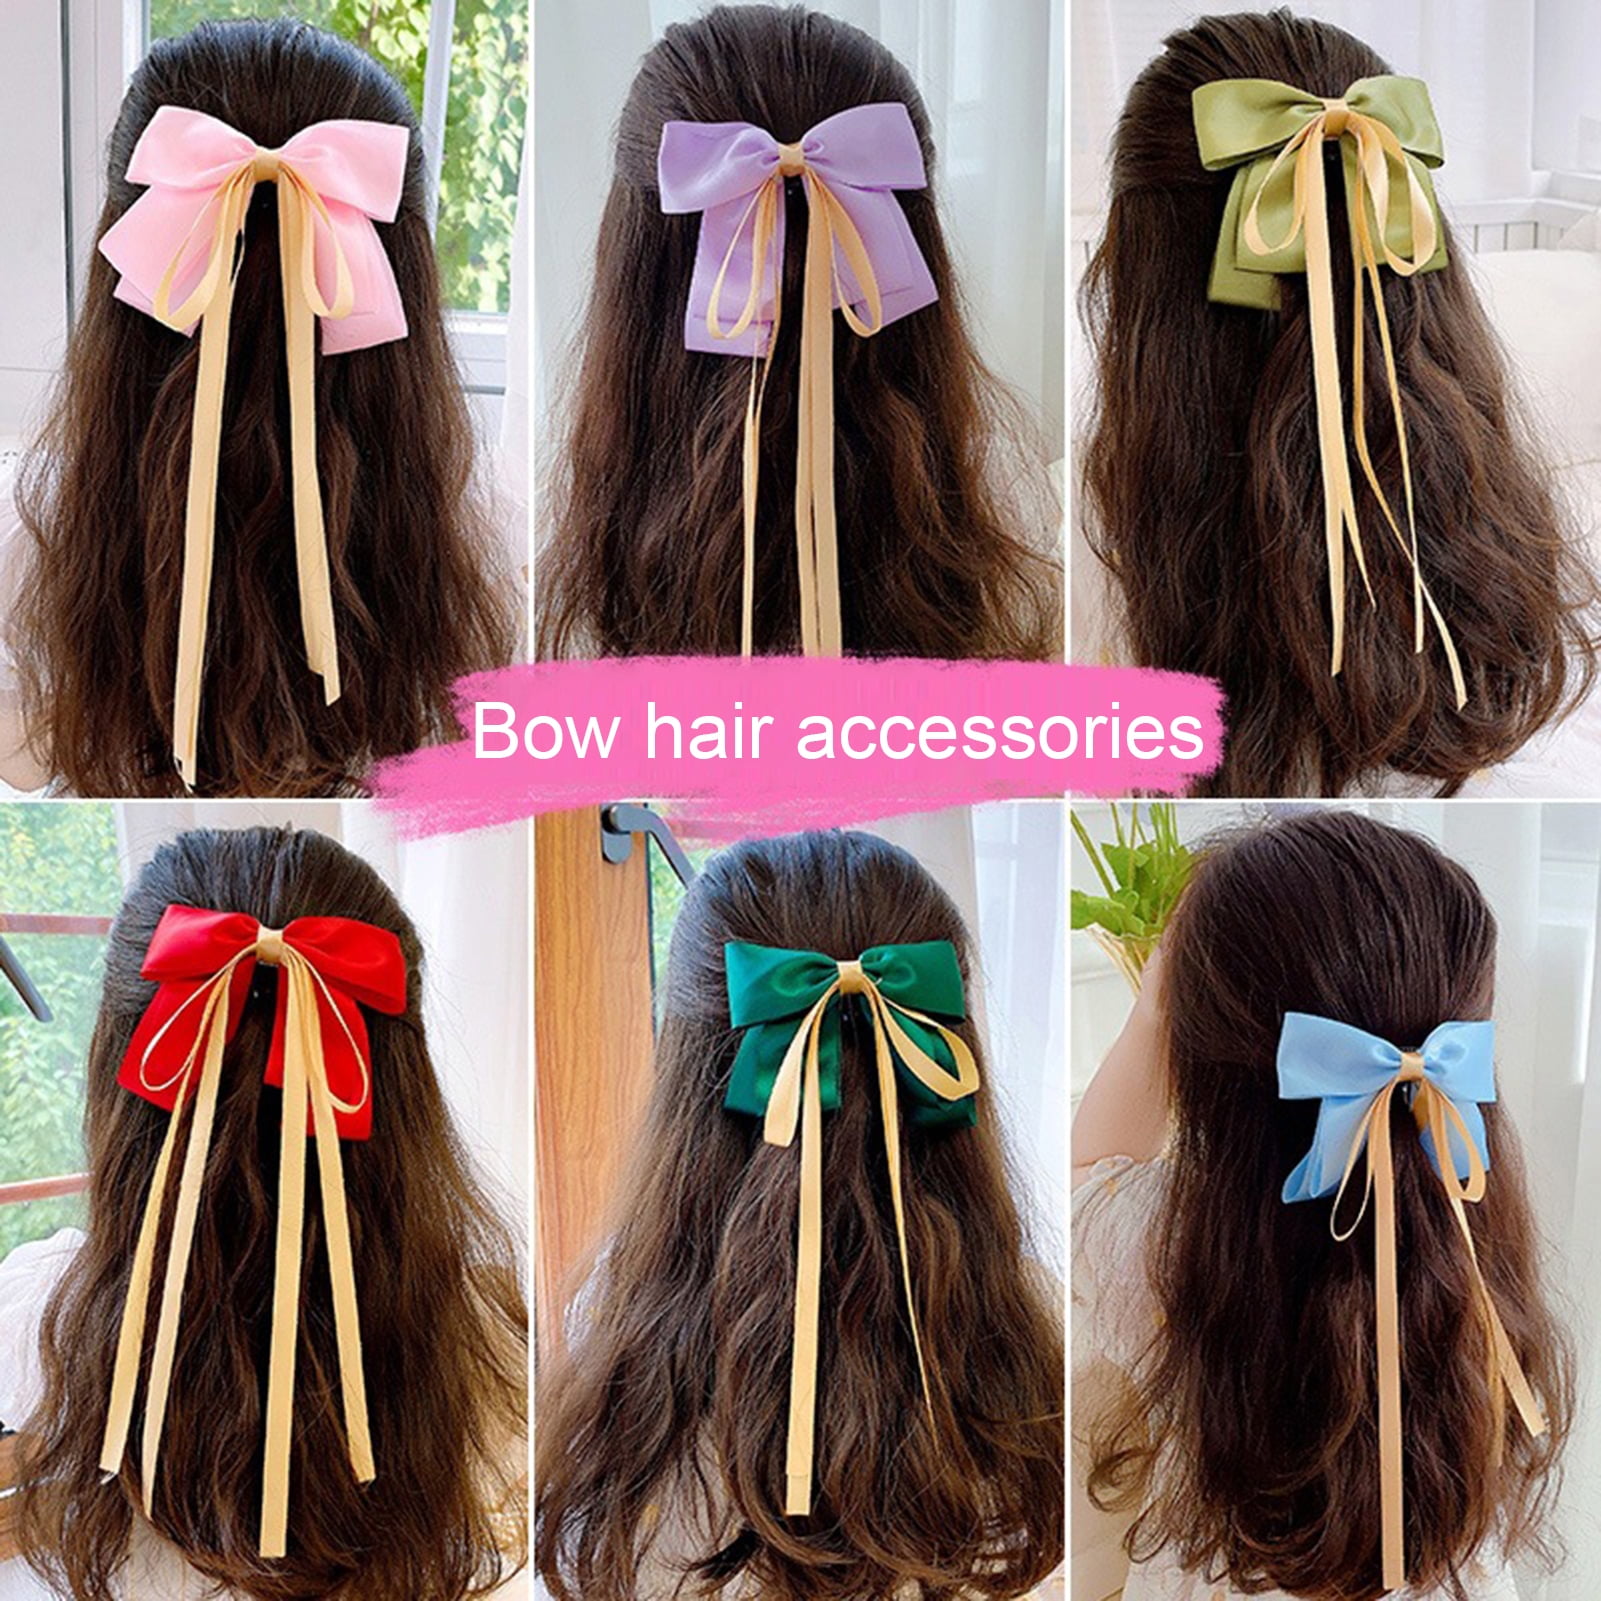 8cm Wide Premium Quality DIY Ribbon for Hair Accessories and